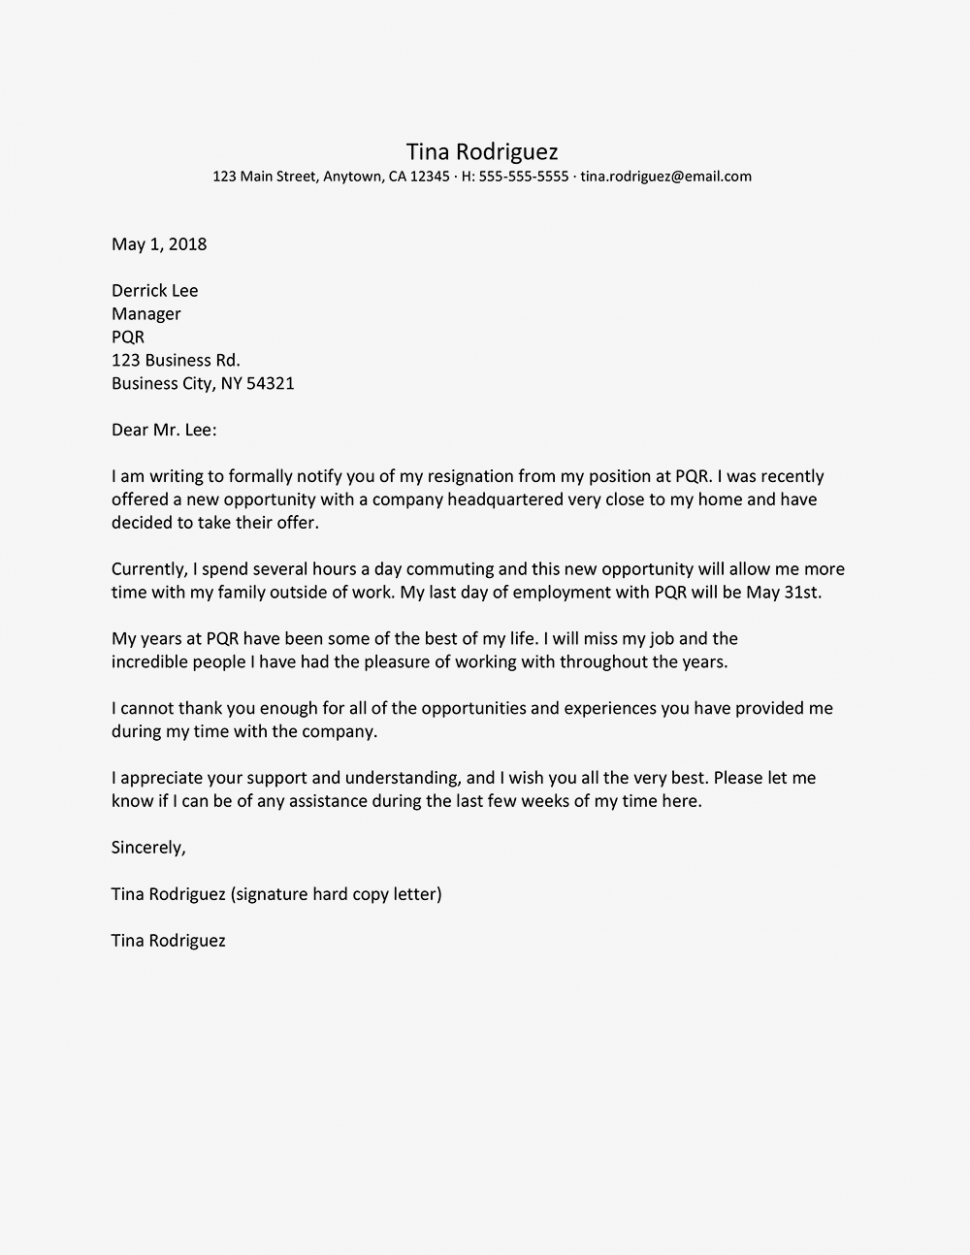  Resignation Letter Due To New Job Opportunity Word